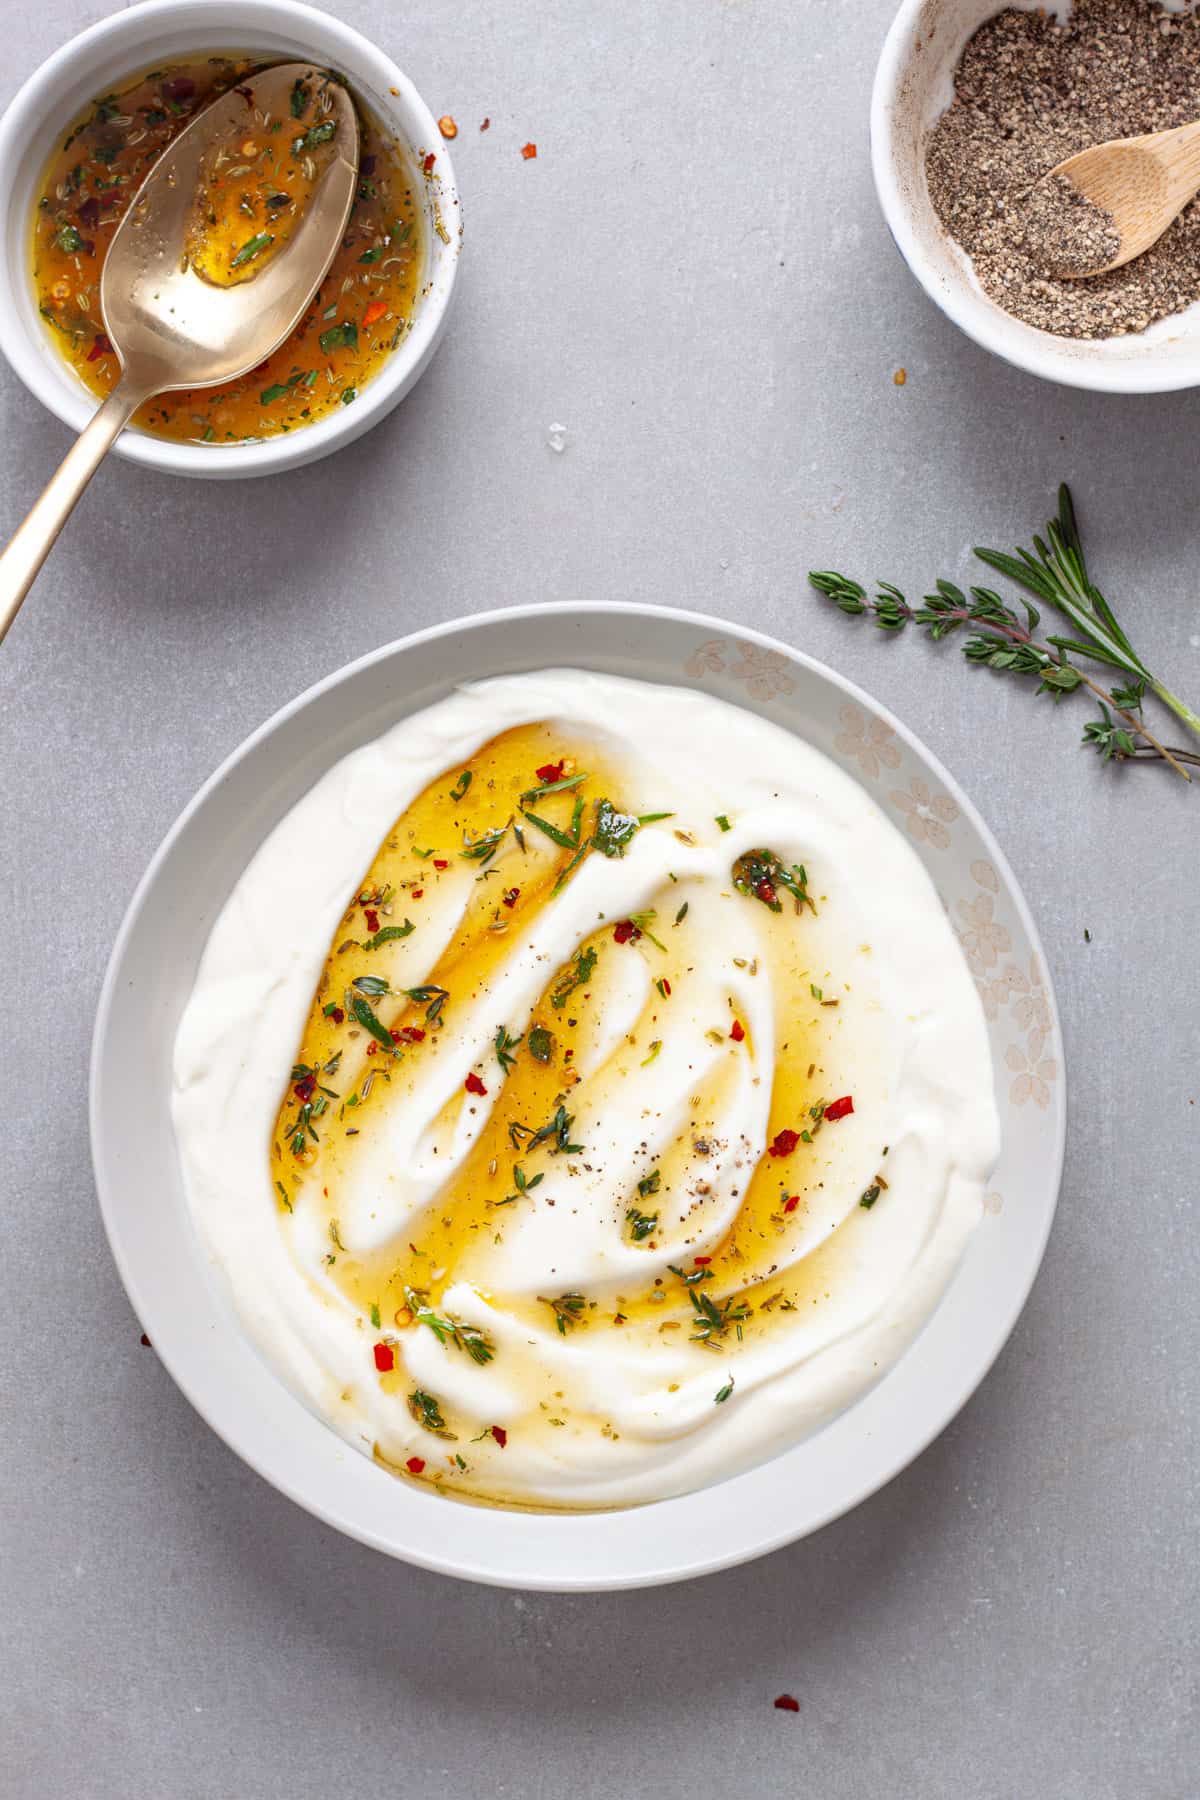 A serving bowl of whipped ricotta cheese dip topped with honey and herbs on a gray table.